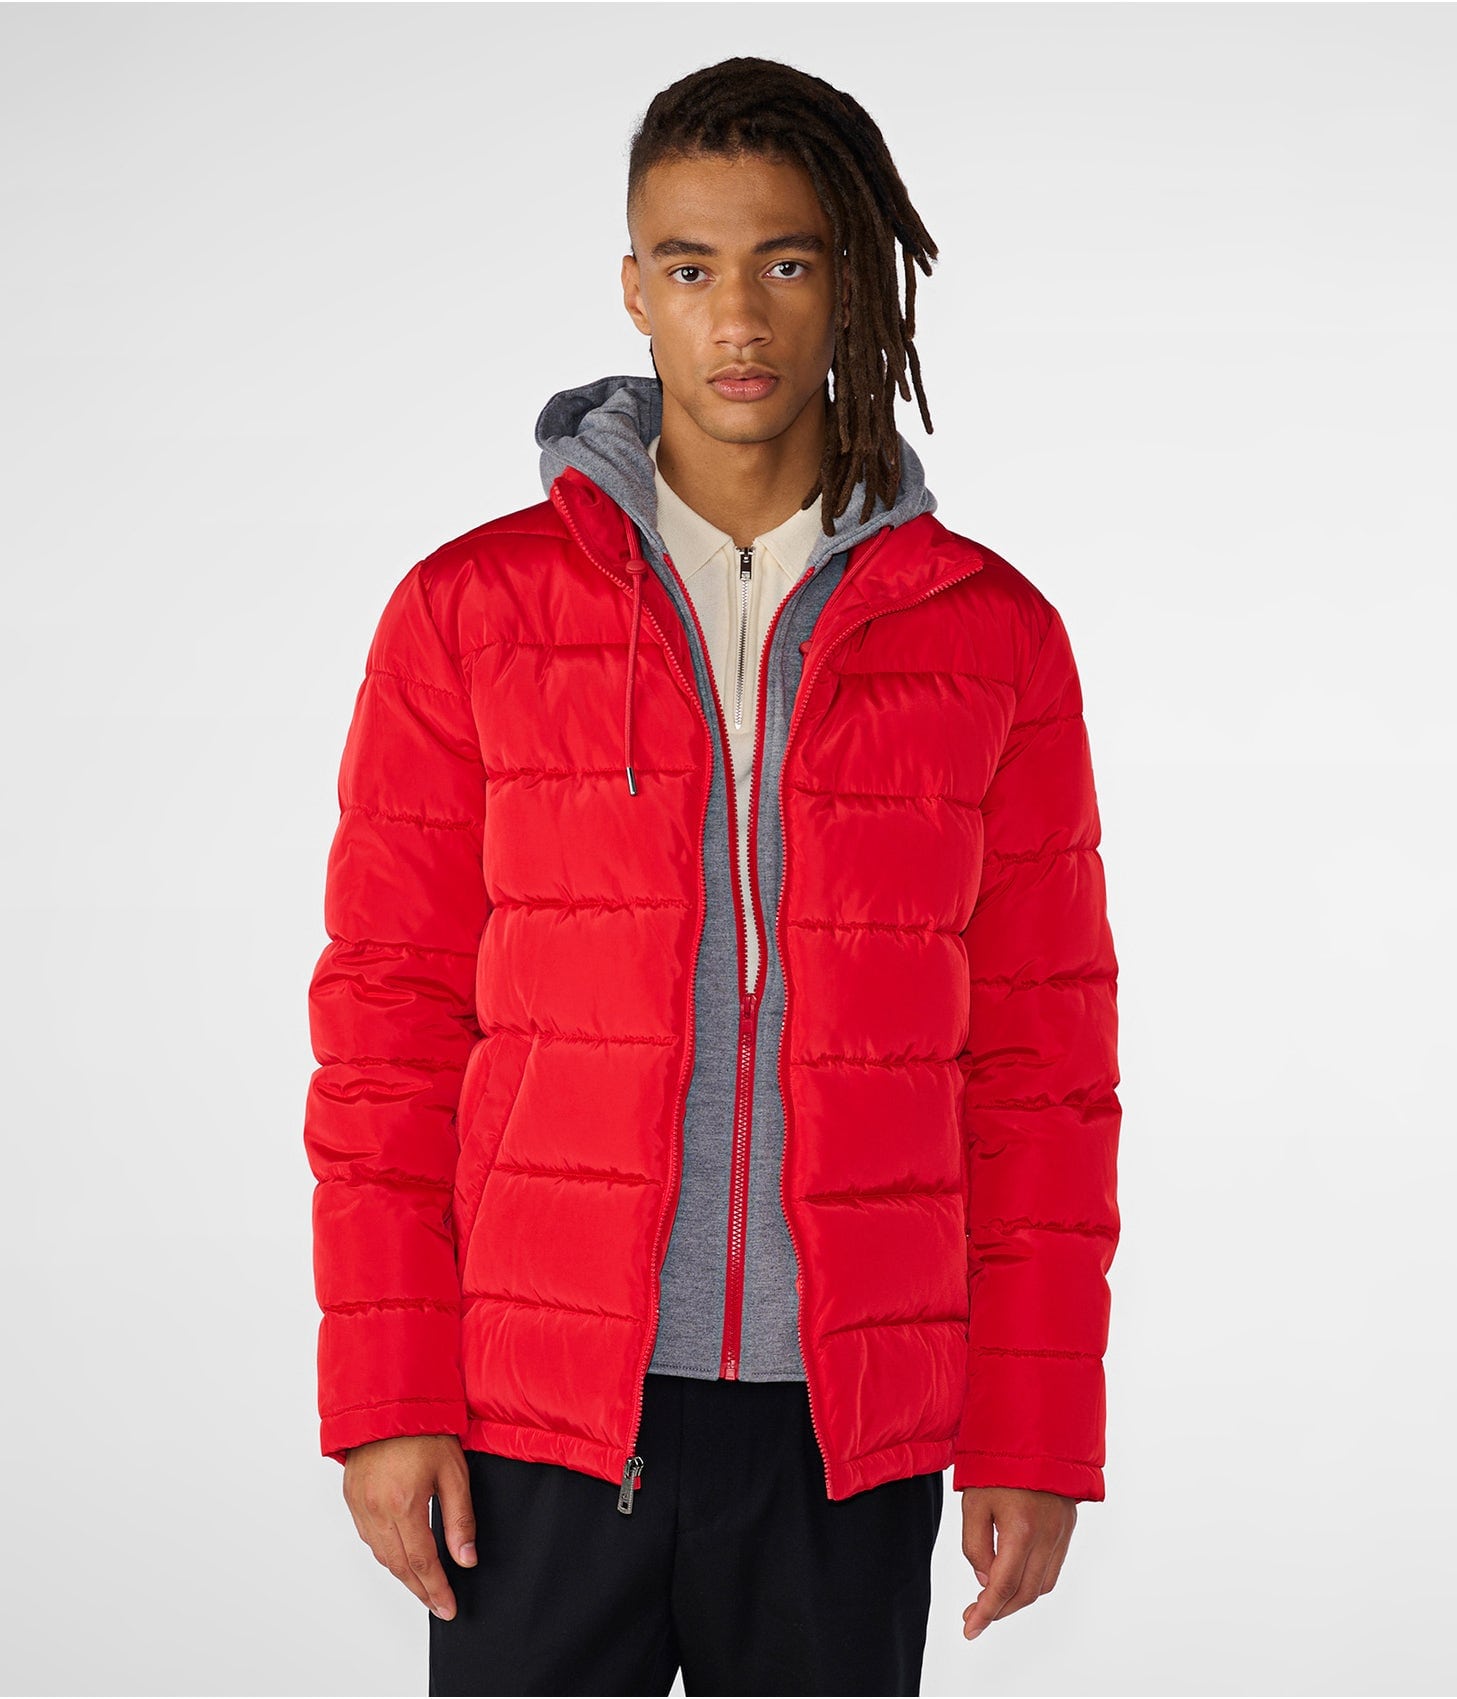 Men's Leather Puffer Jacket In Red With Removable Hood